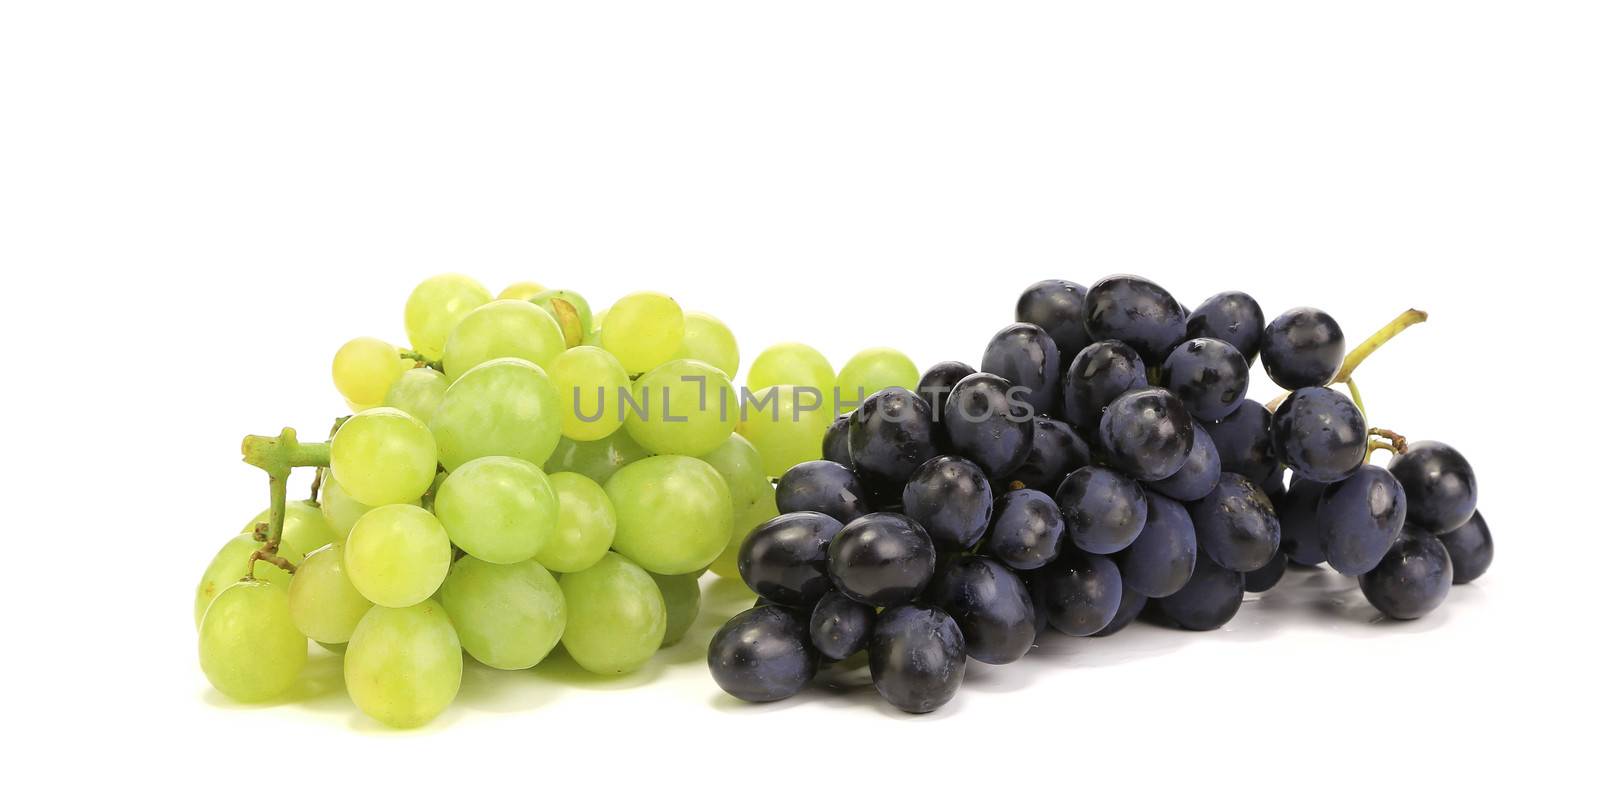 White and blue grape bunches. Isolated on a white background.